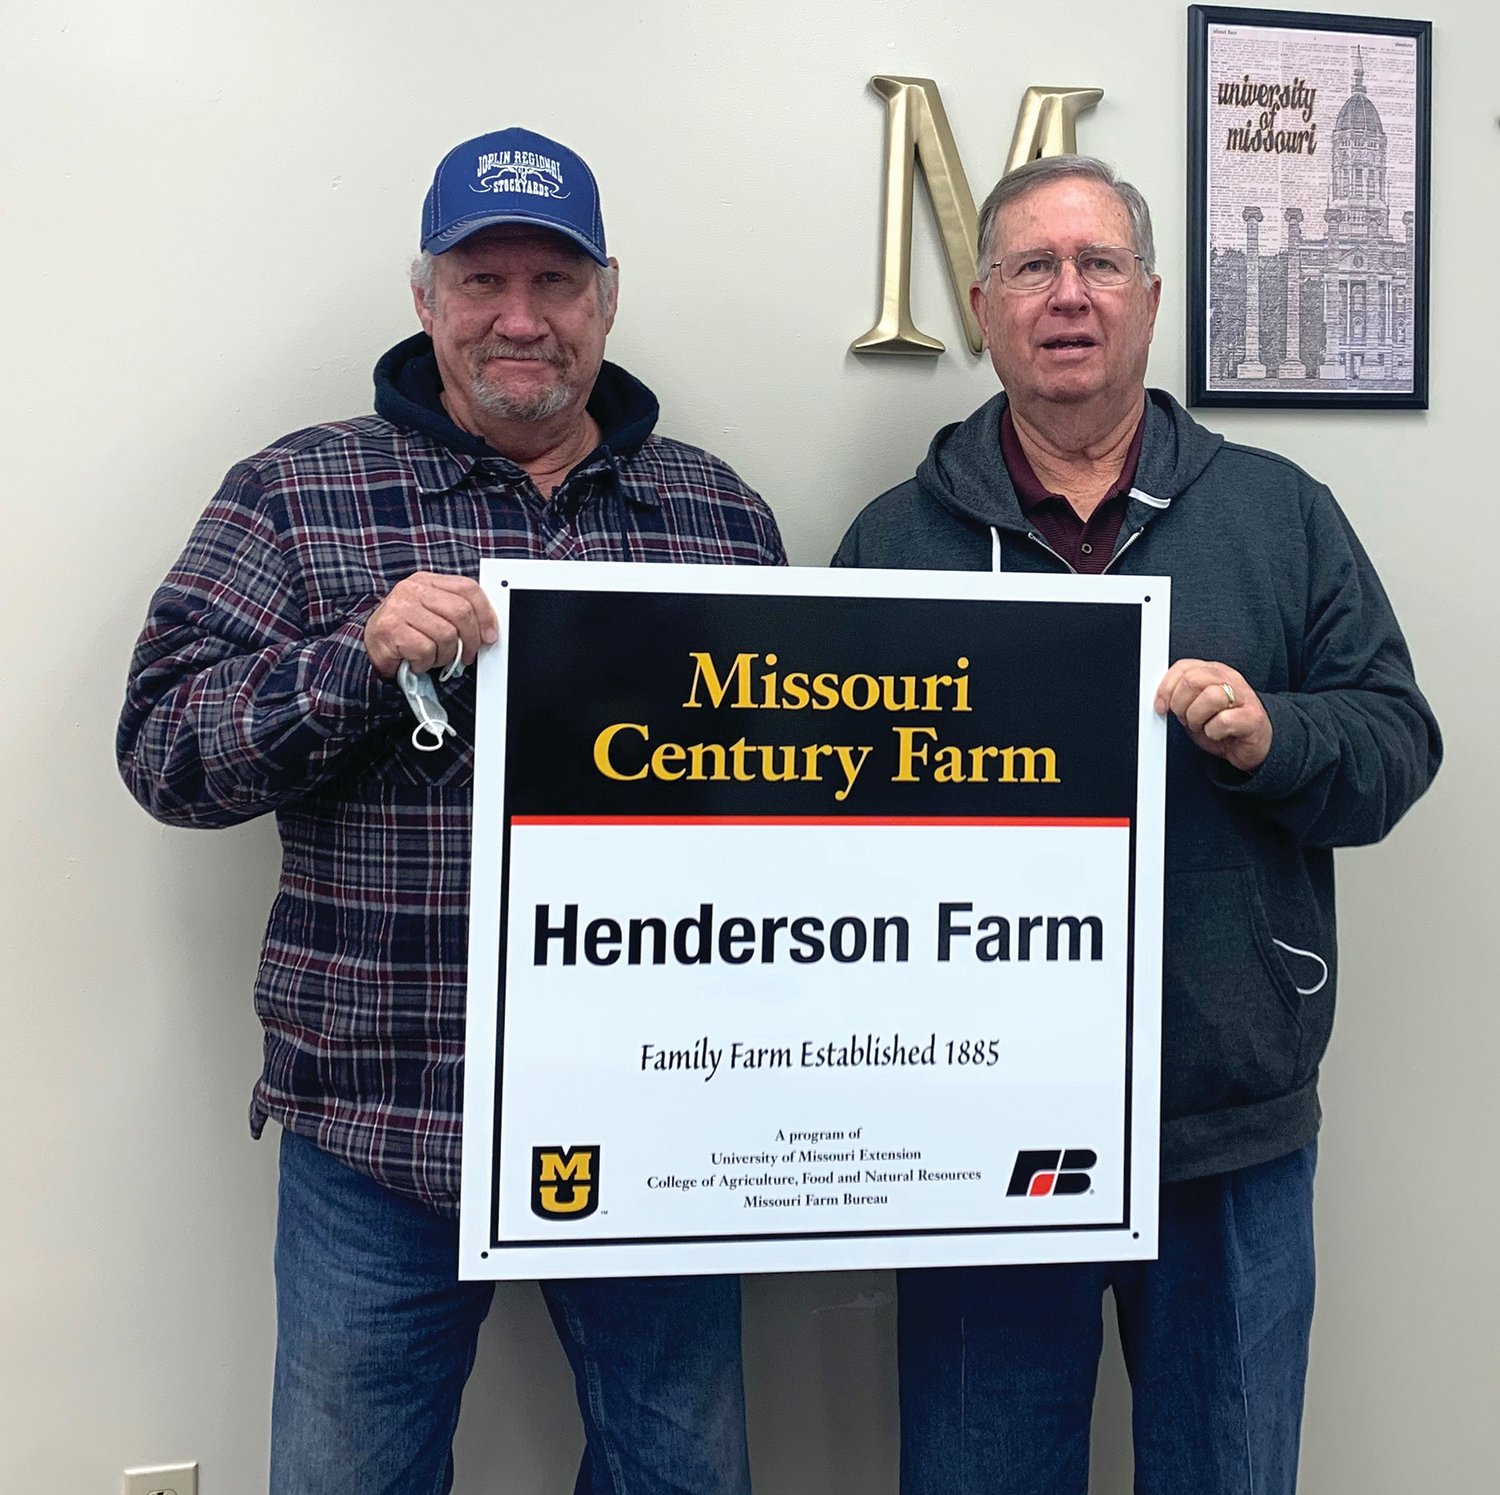 William and Thomas Henderson were recognized. The year of Century Farm acquisition was 1885 with 258 acres in Grovespring. Great-grandfather, Miles Jehial Hudson, was the original owner.